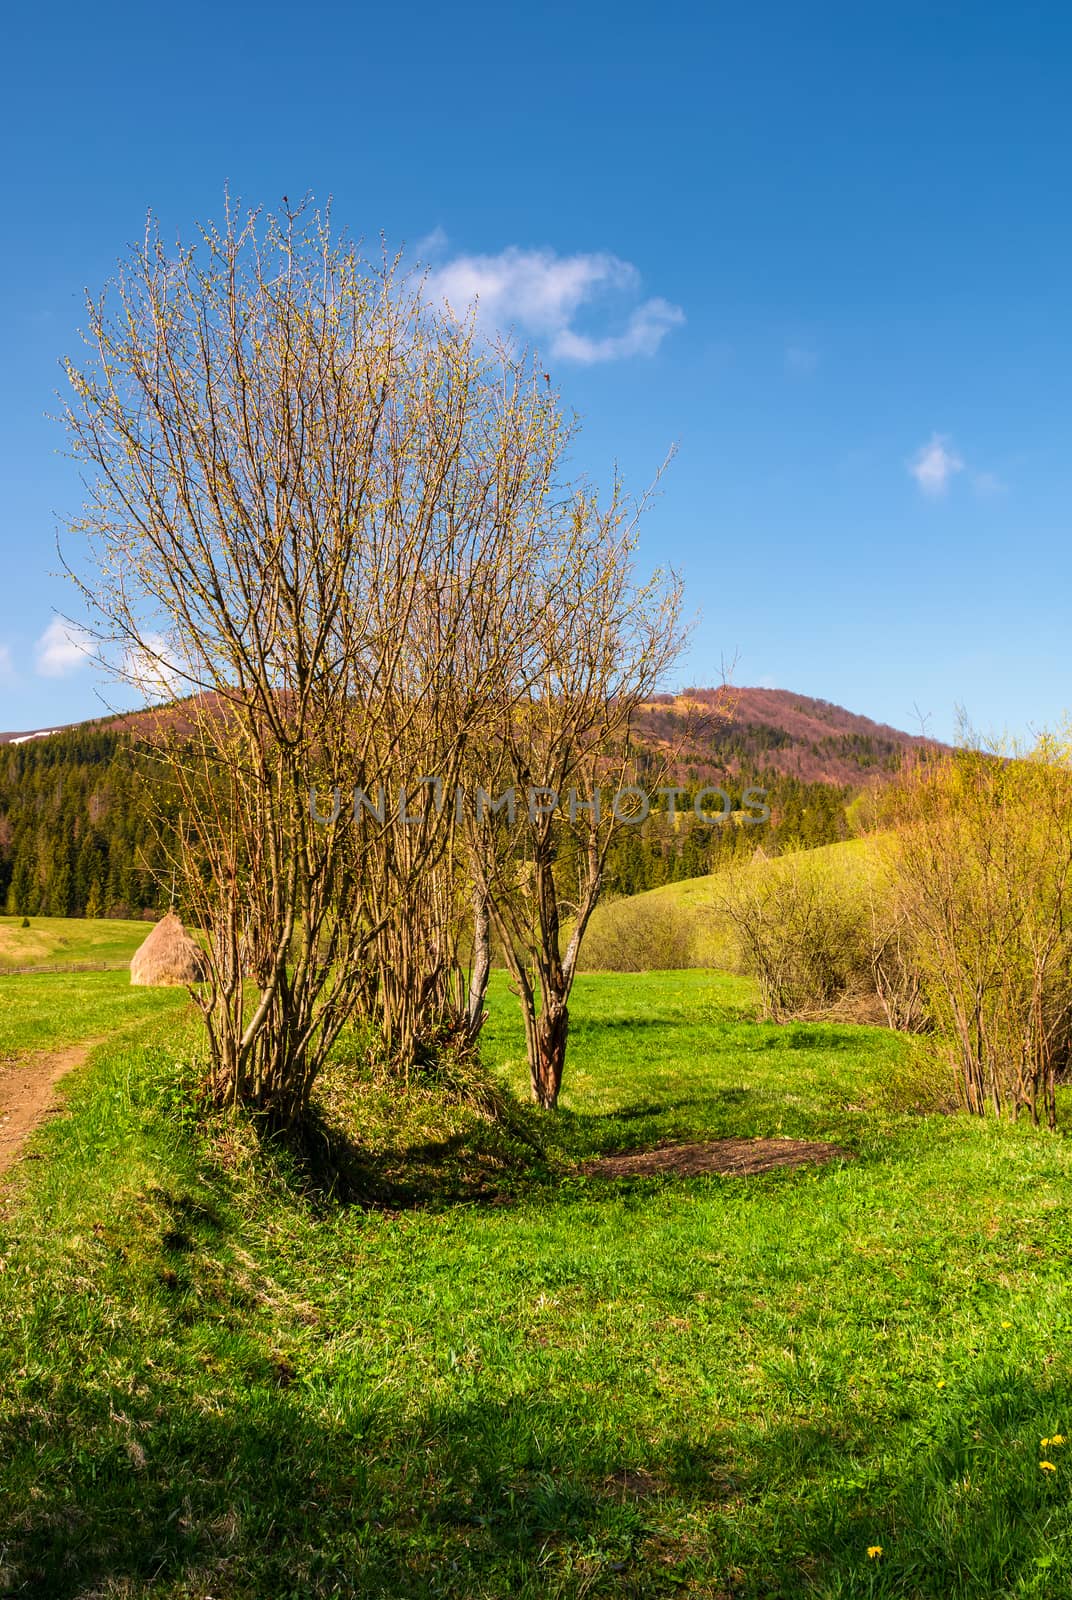 leafless tree in front of a mountain. beautiful countryside scenery in springtime